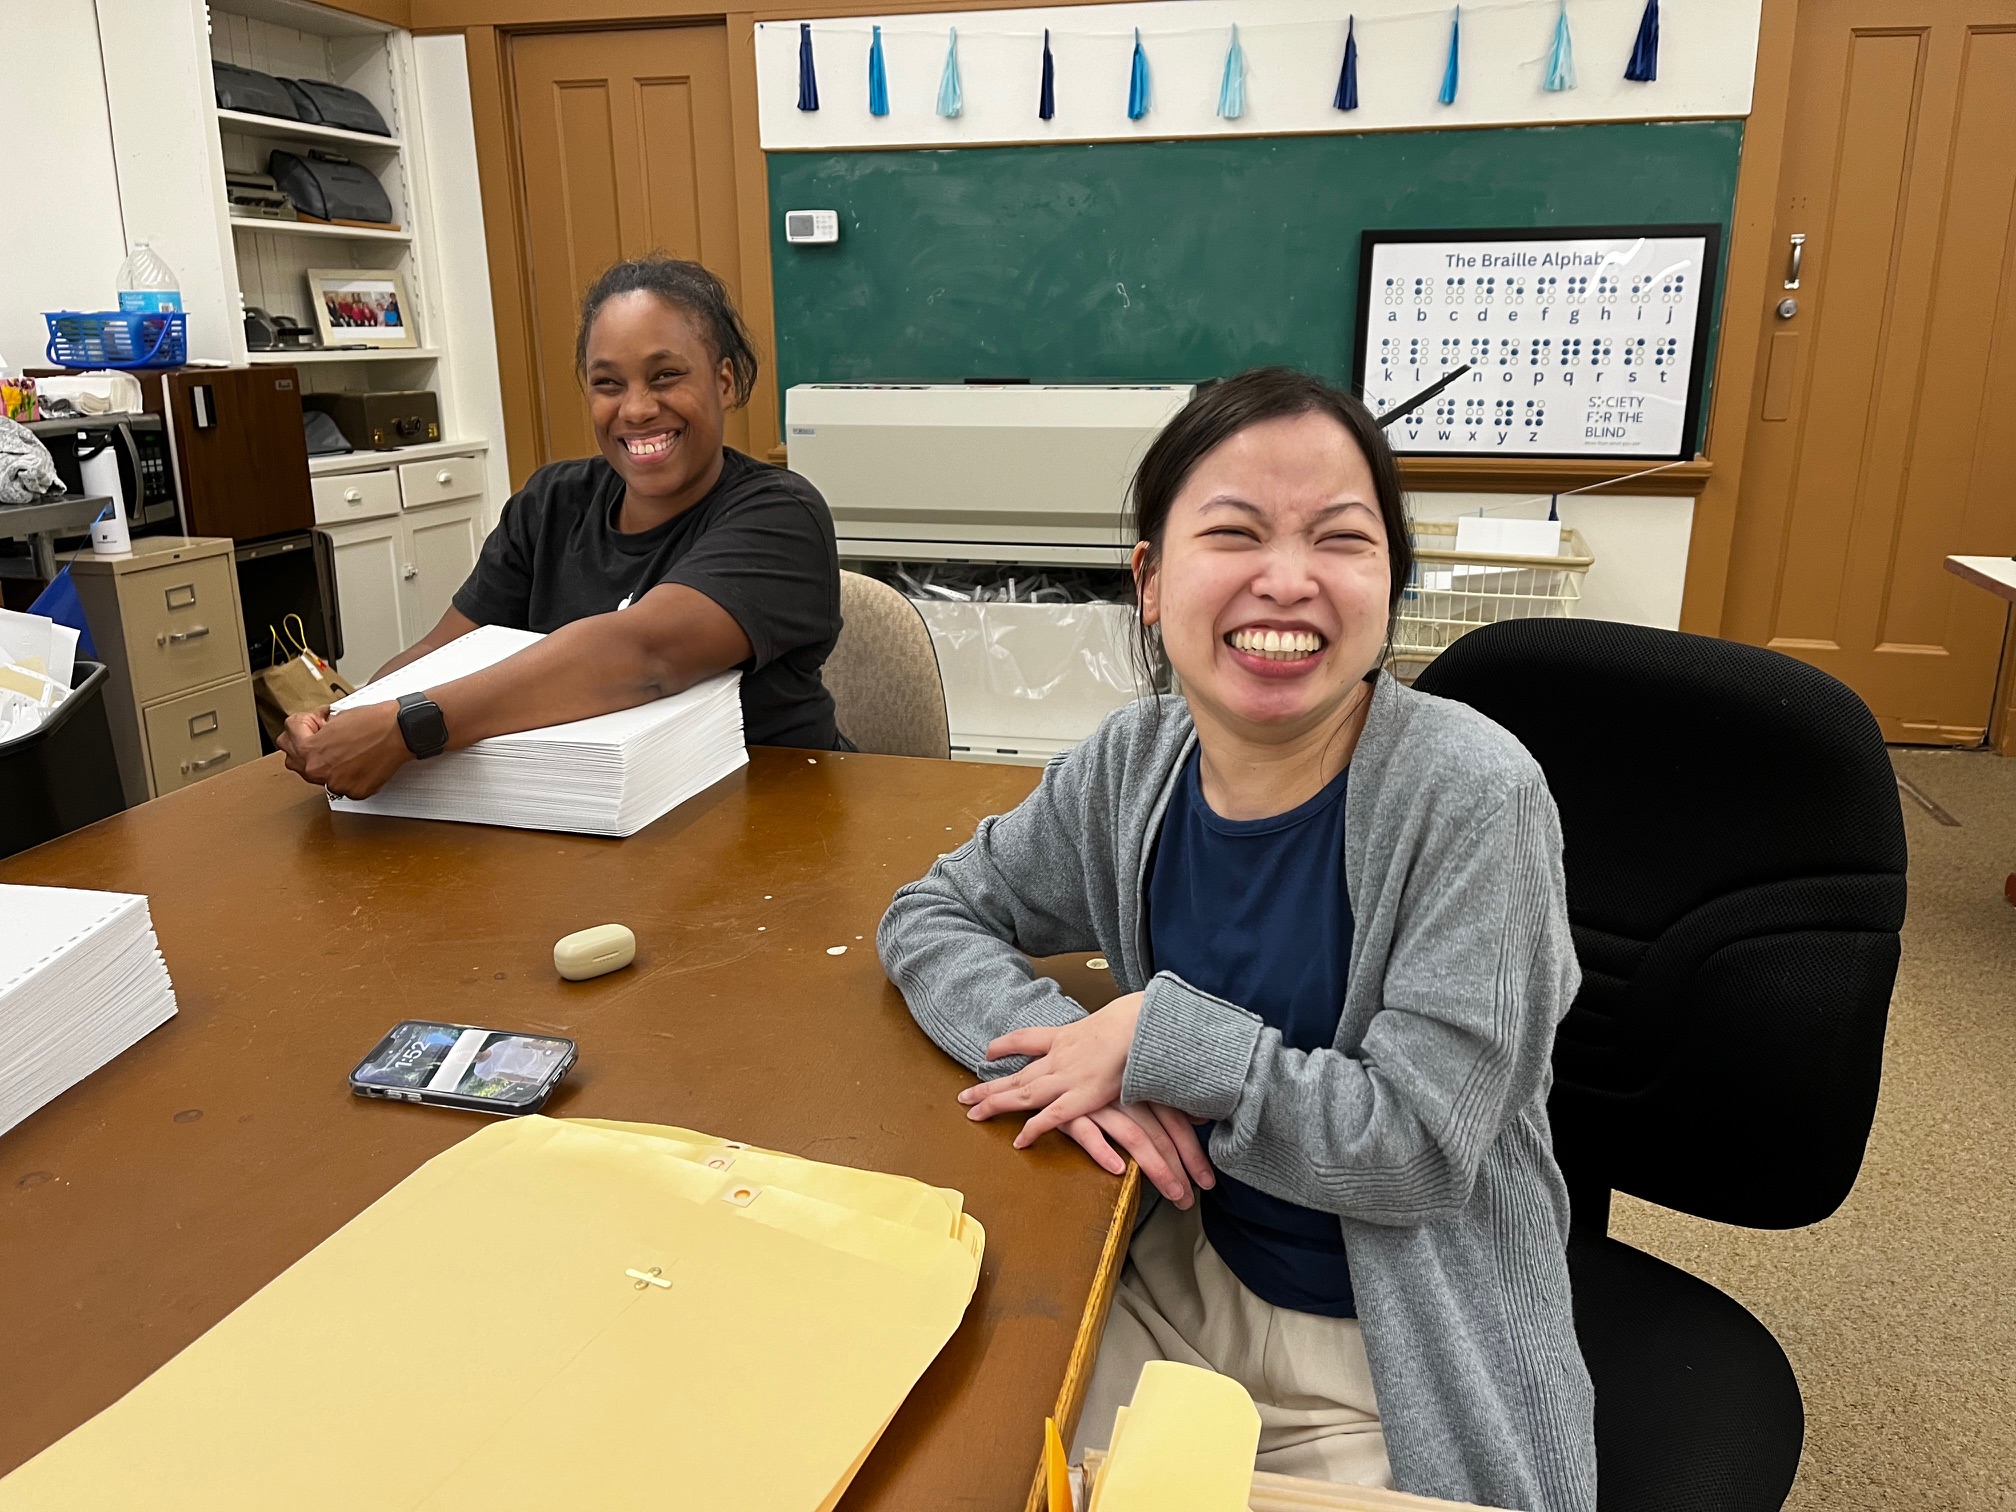 A Black woman wearing a black tee shirt and smart watch and an Asian woman in a grey cardigan take a break from creating Braille materials at a long brown table to smile for the camera.